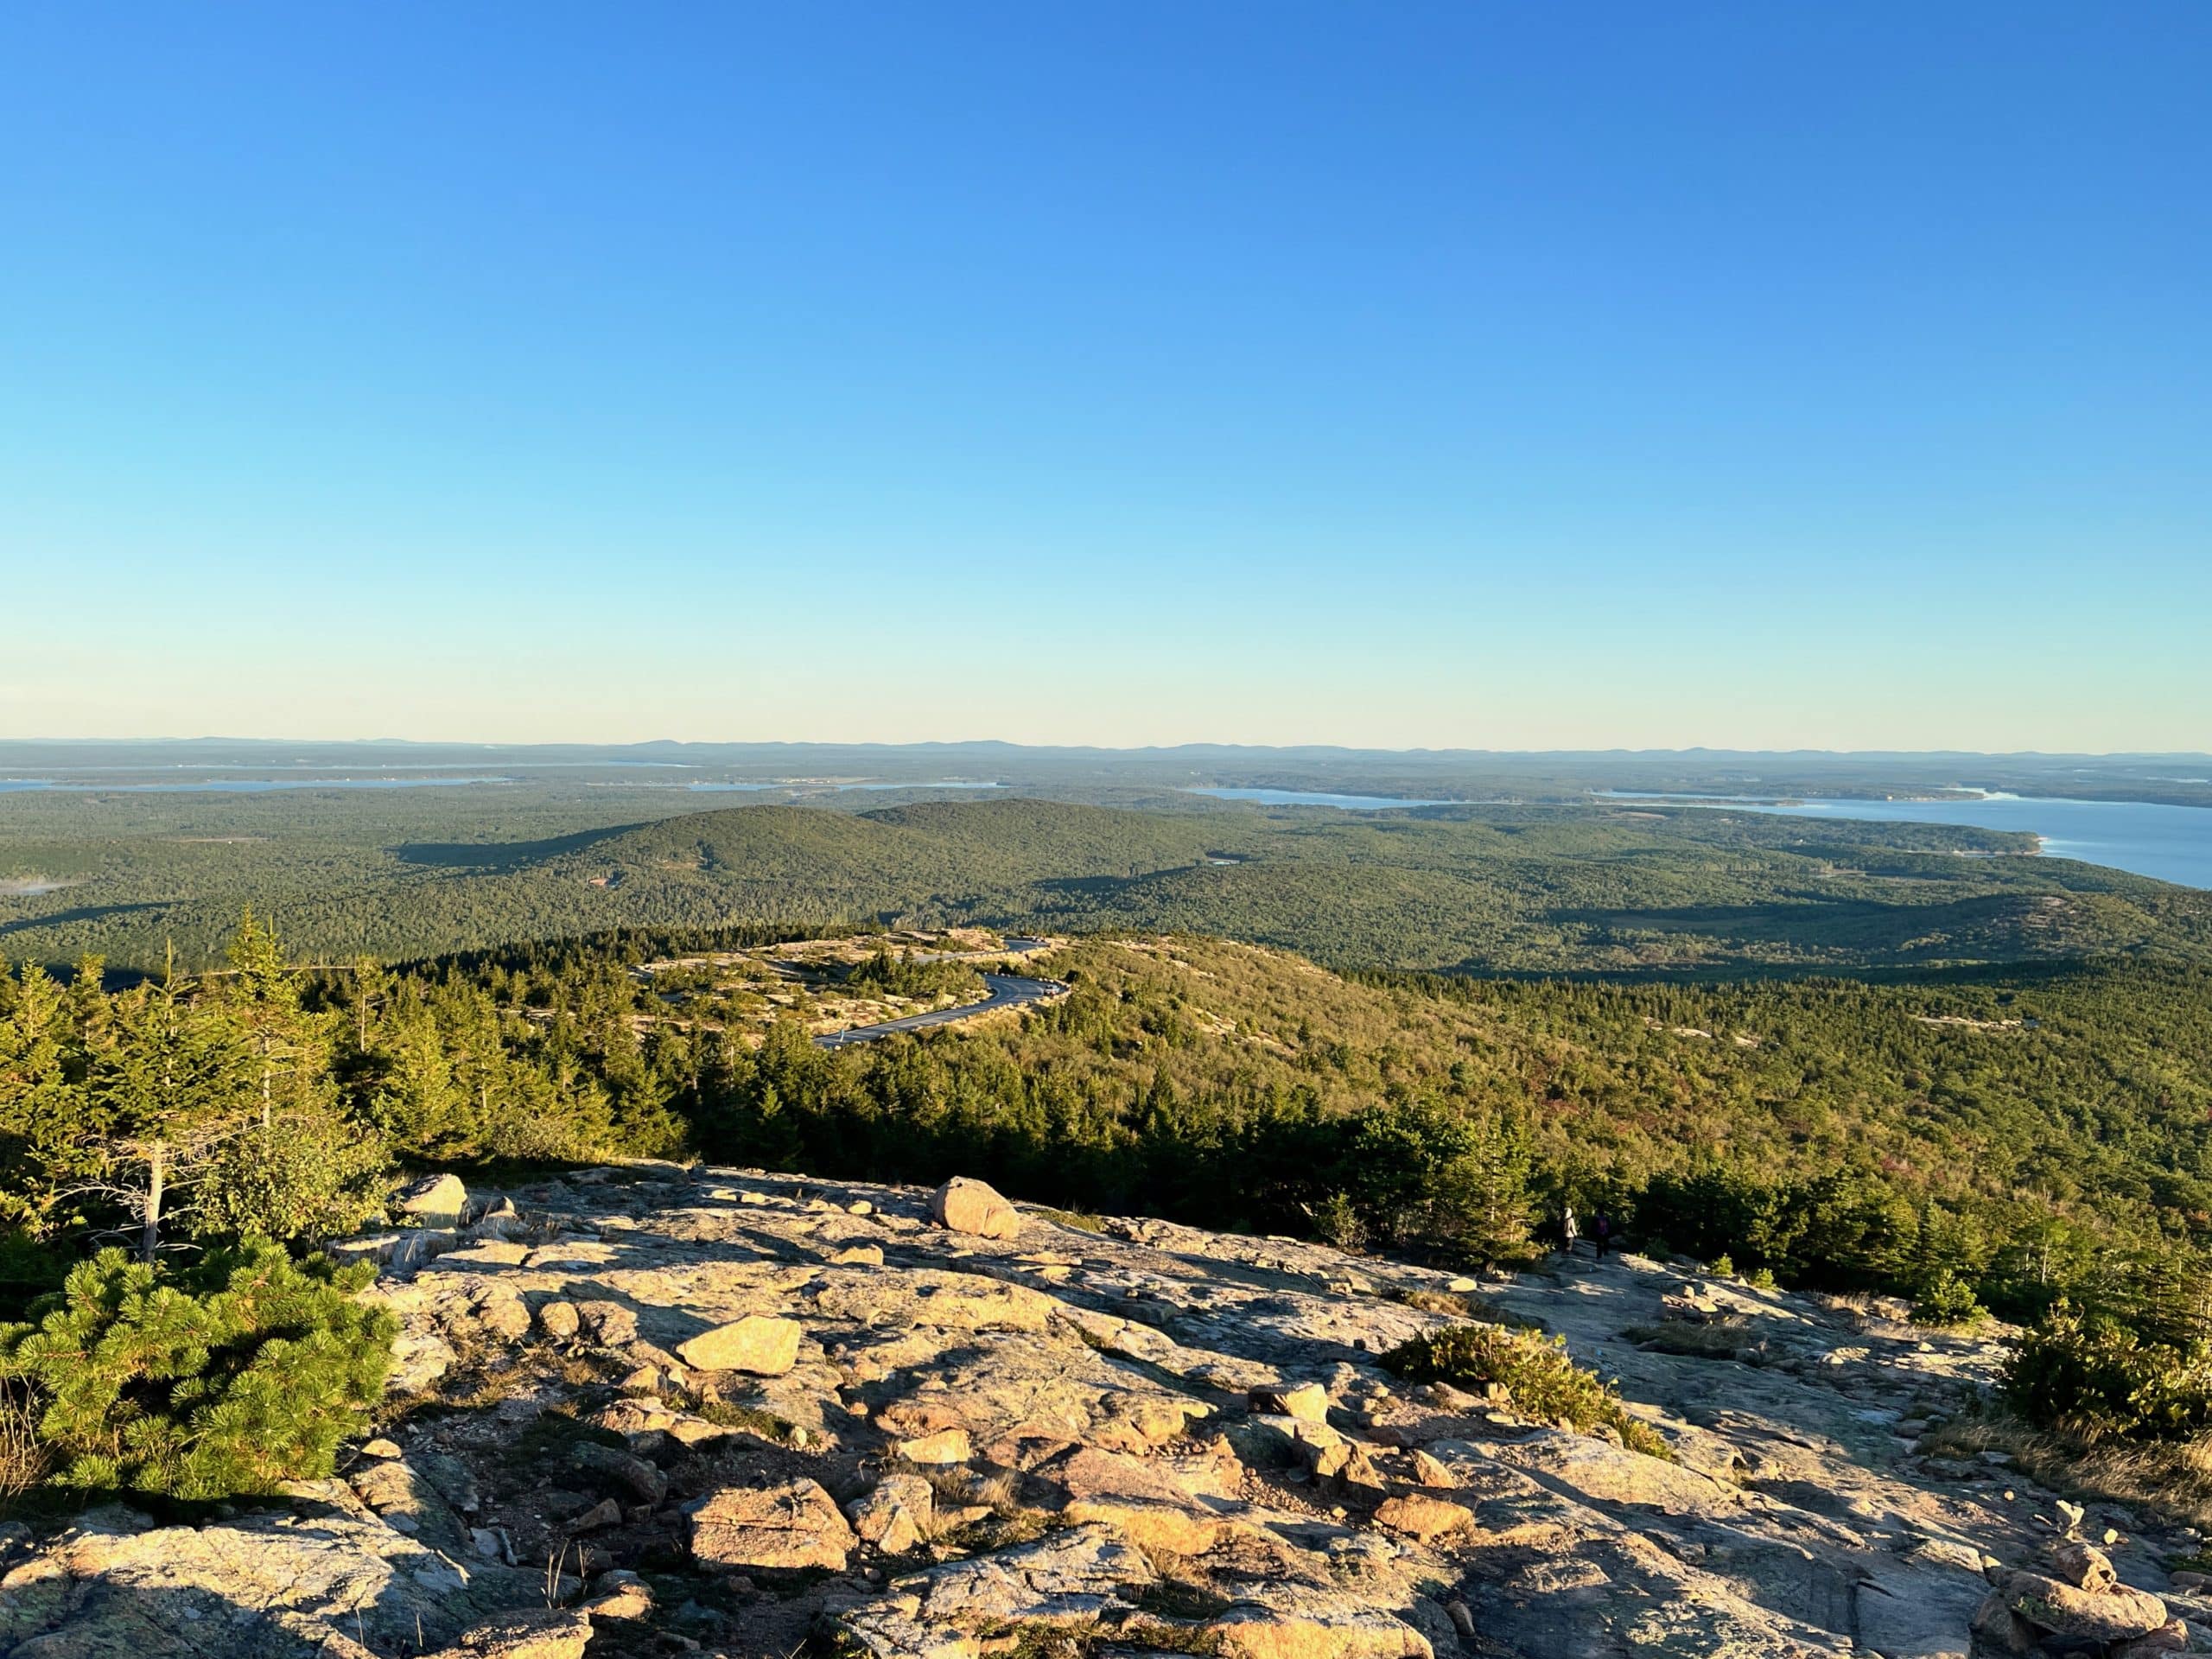 Looking out from the top of Cadillac Mountain in Maine